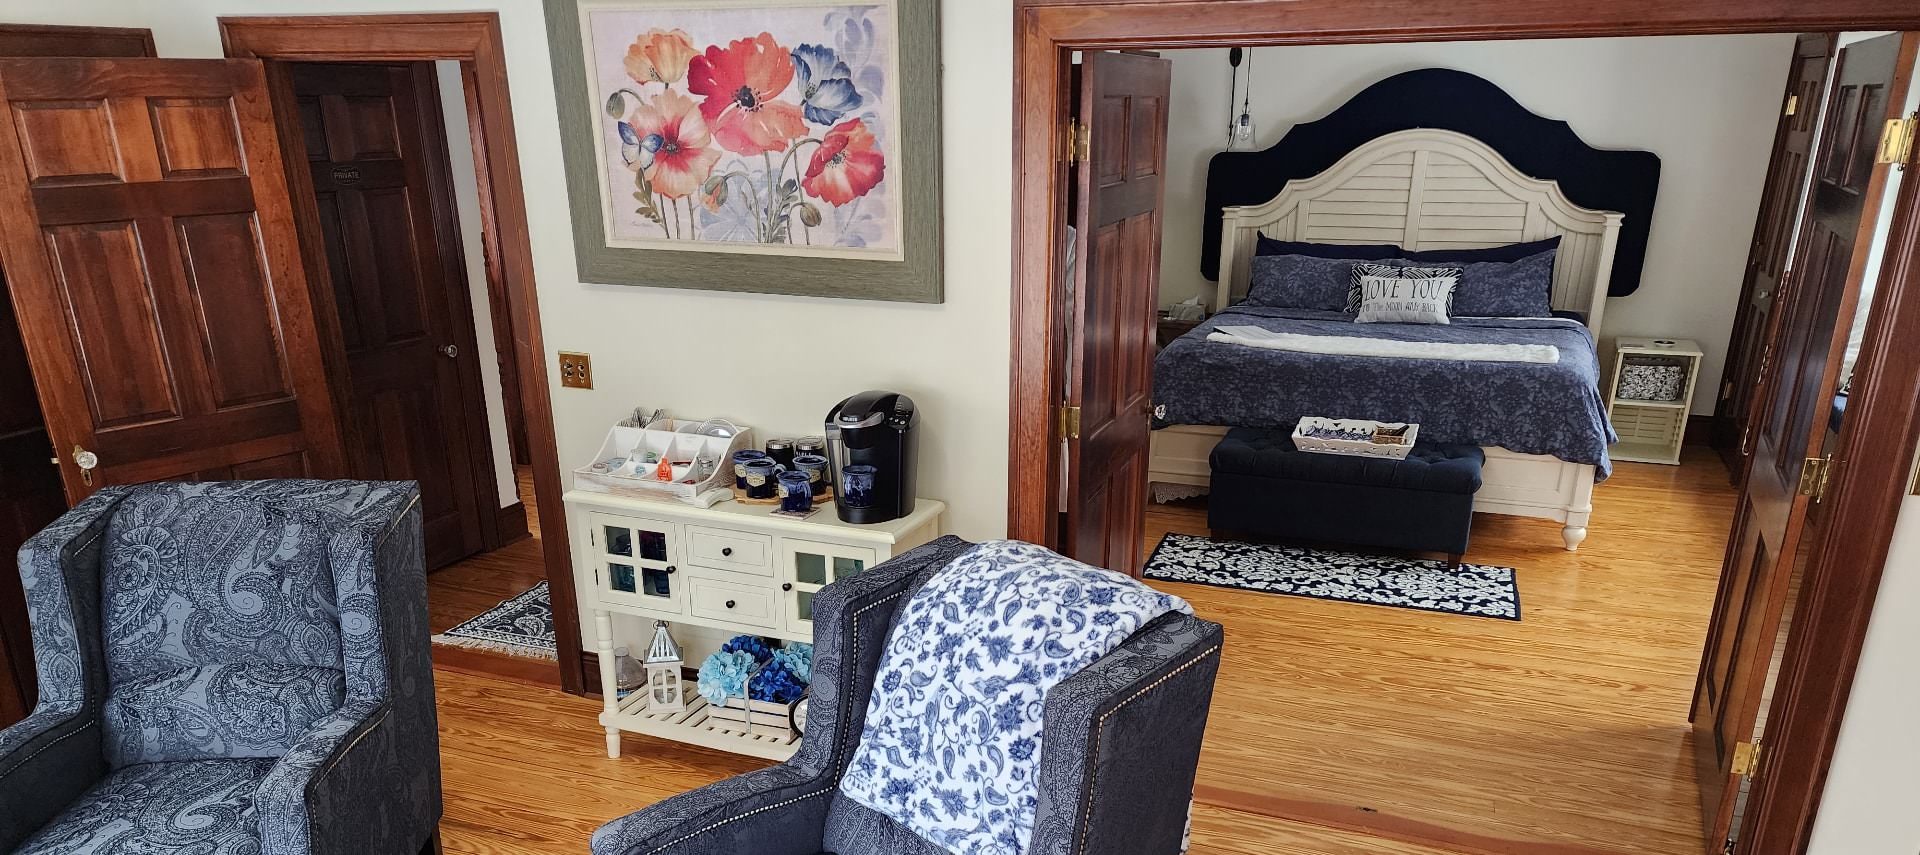 Room with two paisley blue upholstered armchairs, white walls, hardwood flooring, and a view into the bedroom